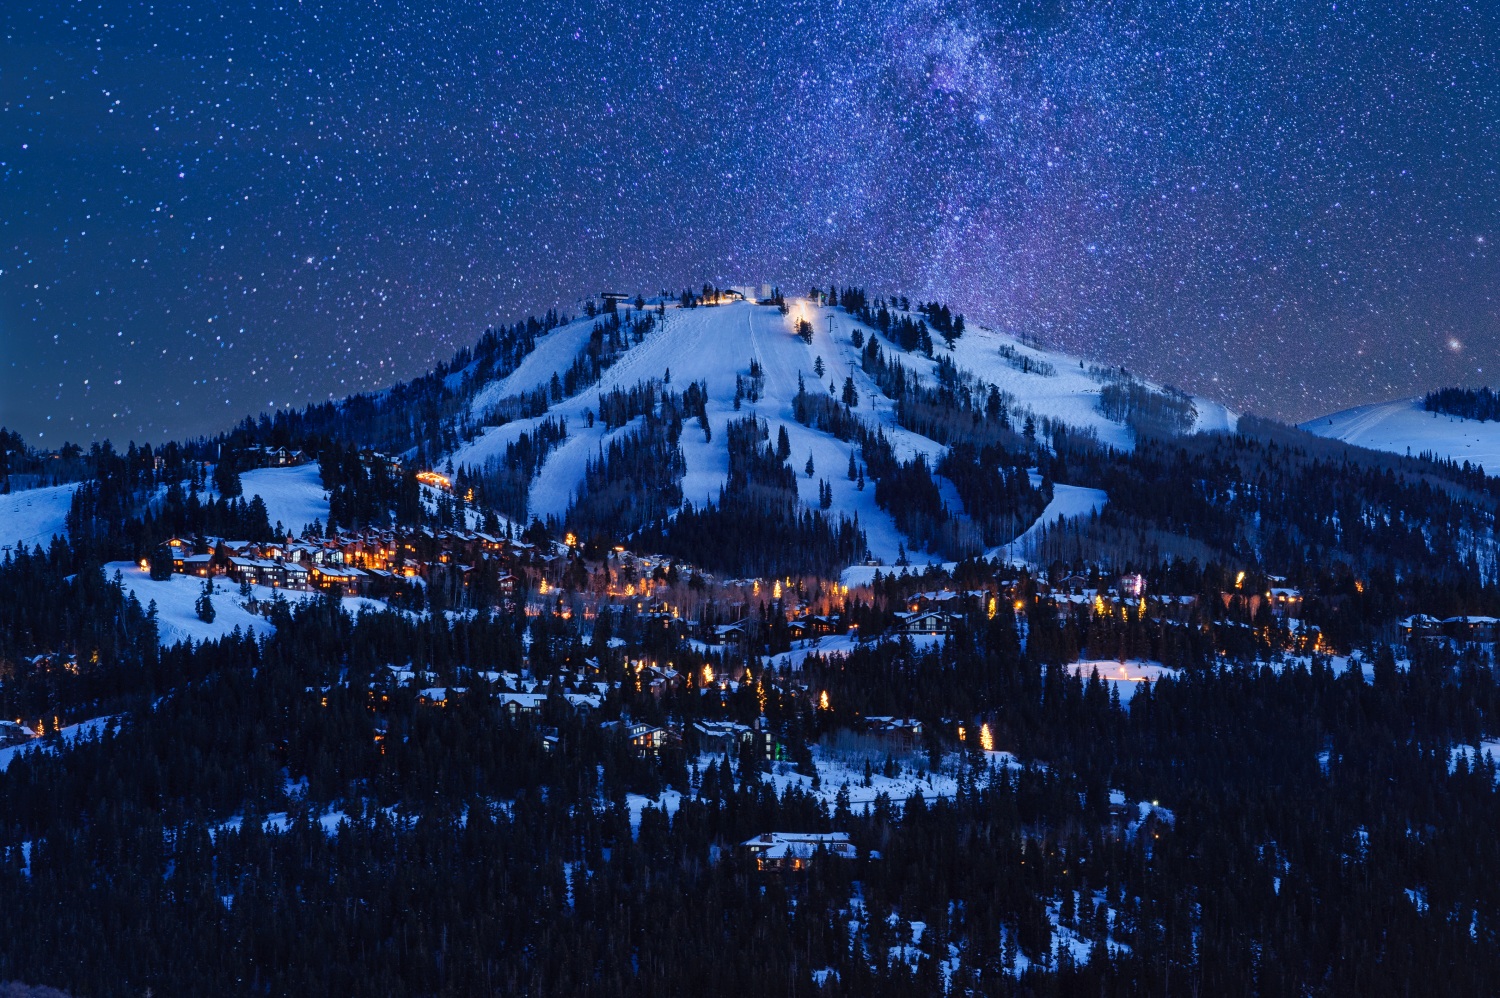 Deer Valley’s Bald Mountain and lit homes at night under a sky full of stars in Park City, UT